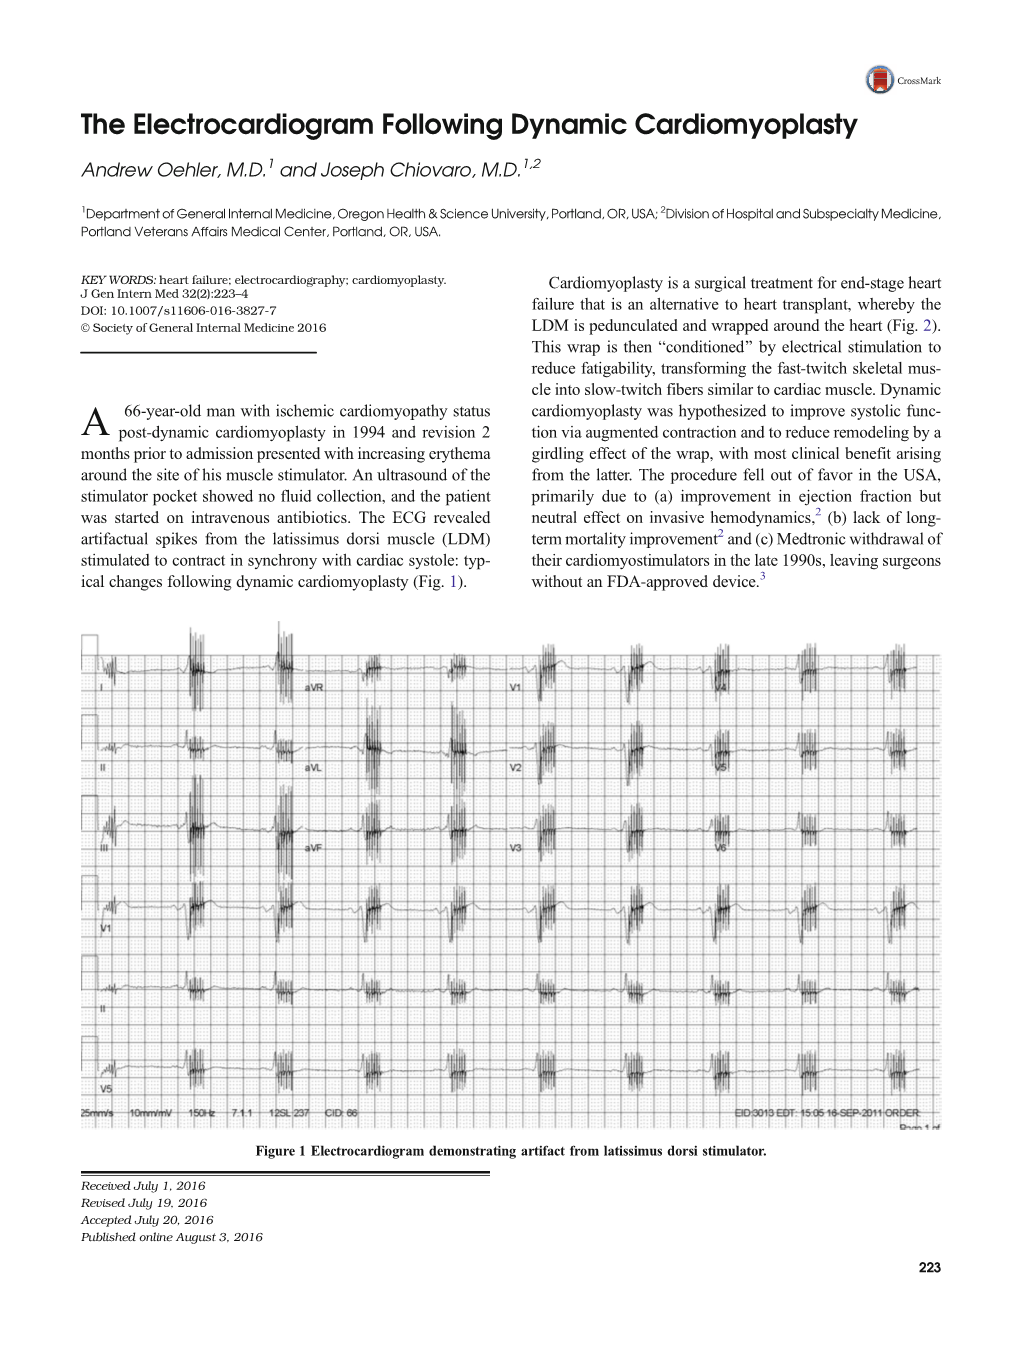 The Electrocardiogram Following Dynamic Cardiomyoplasty Andrew Oehler, M.D.1 and Joseph Chiovaro, M.D.1,2